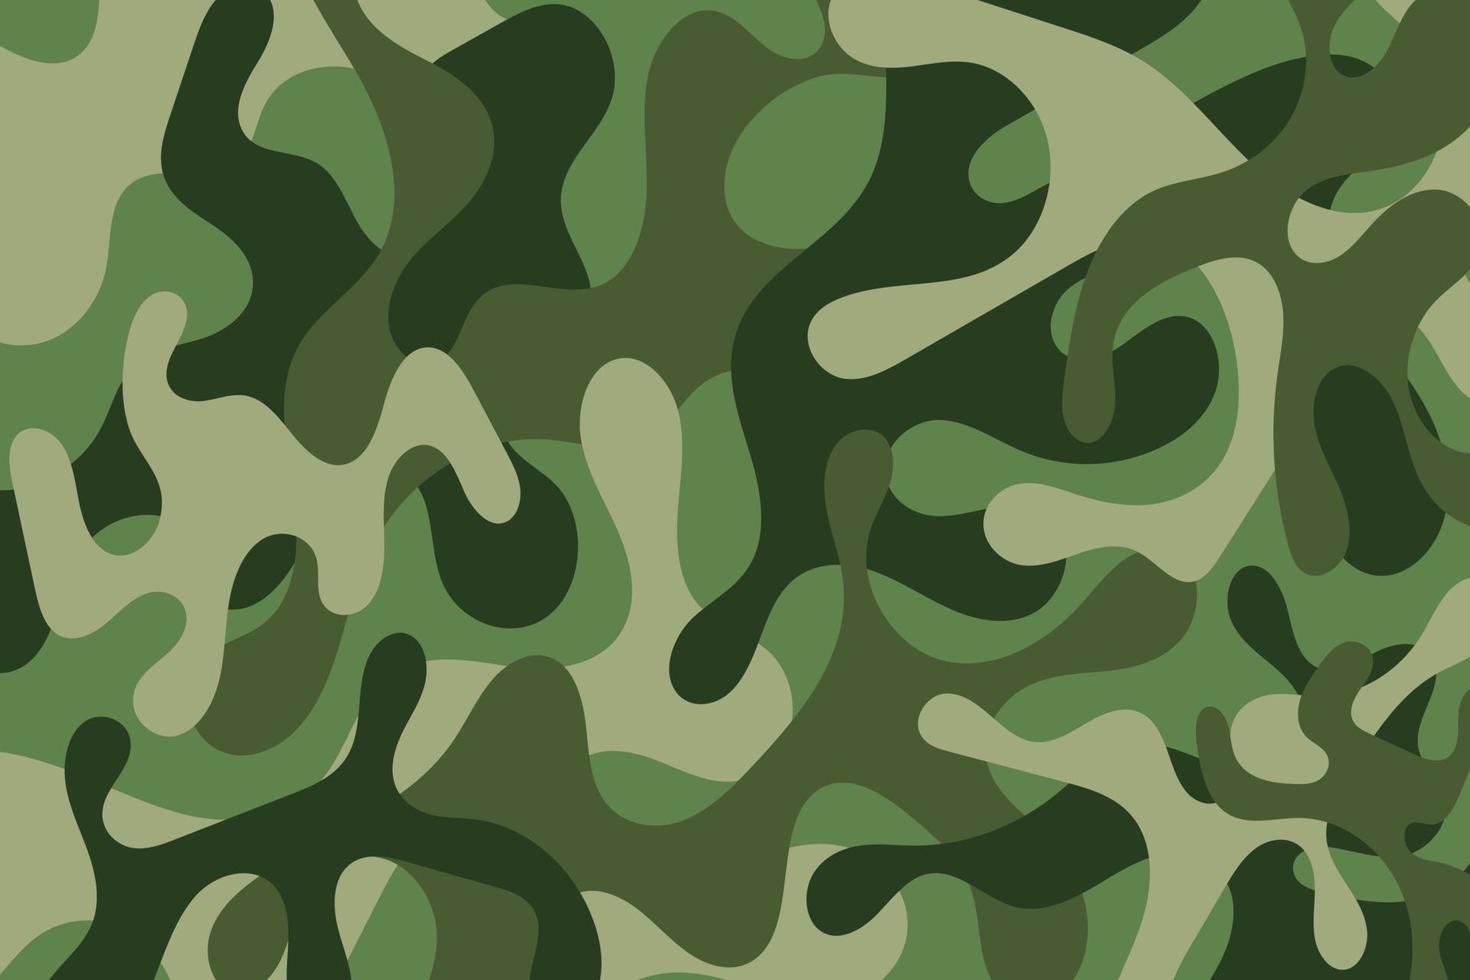 camouflage soldier pattern design background. clothing style army green camo repeat print. vector illustration